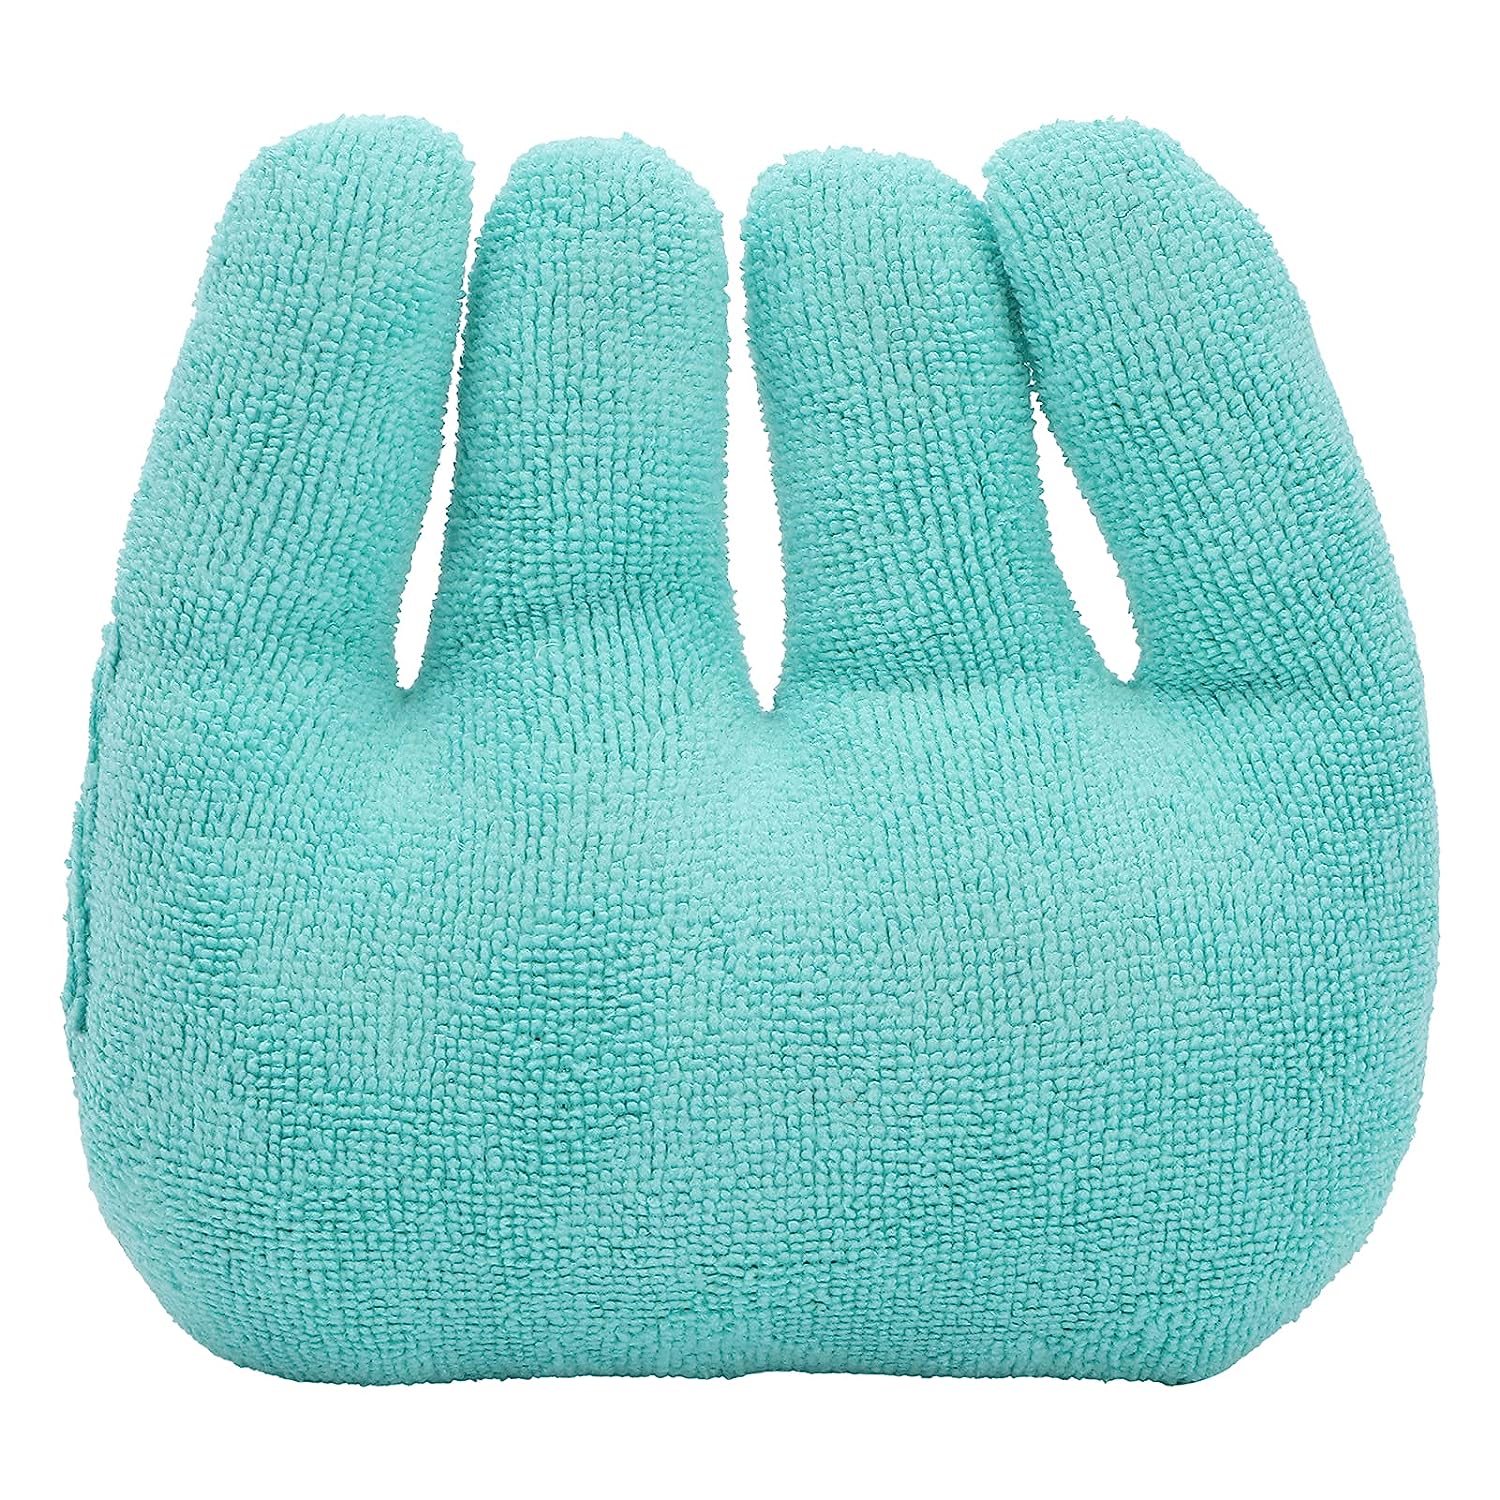 Comfy Hand Finger Contracture Cushion